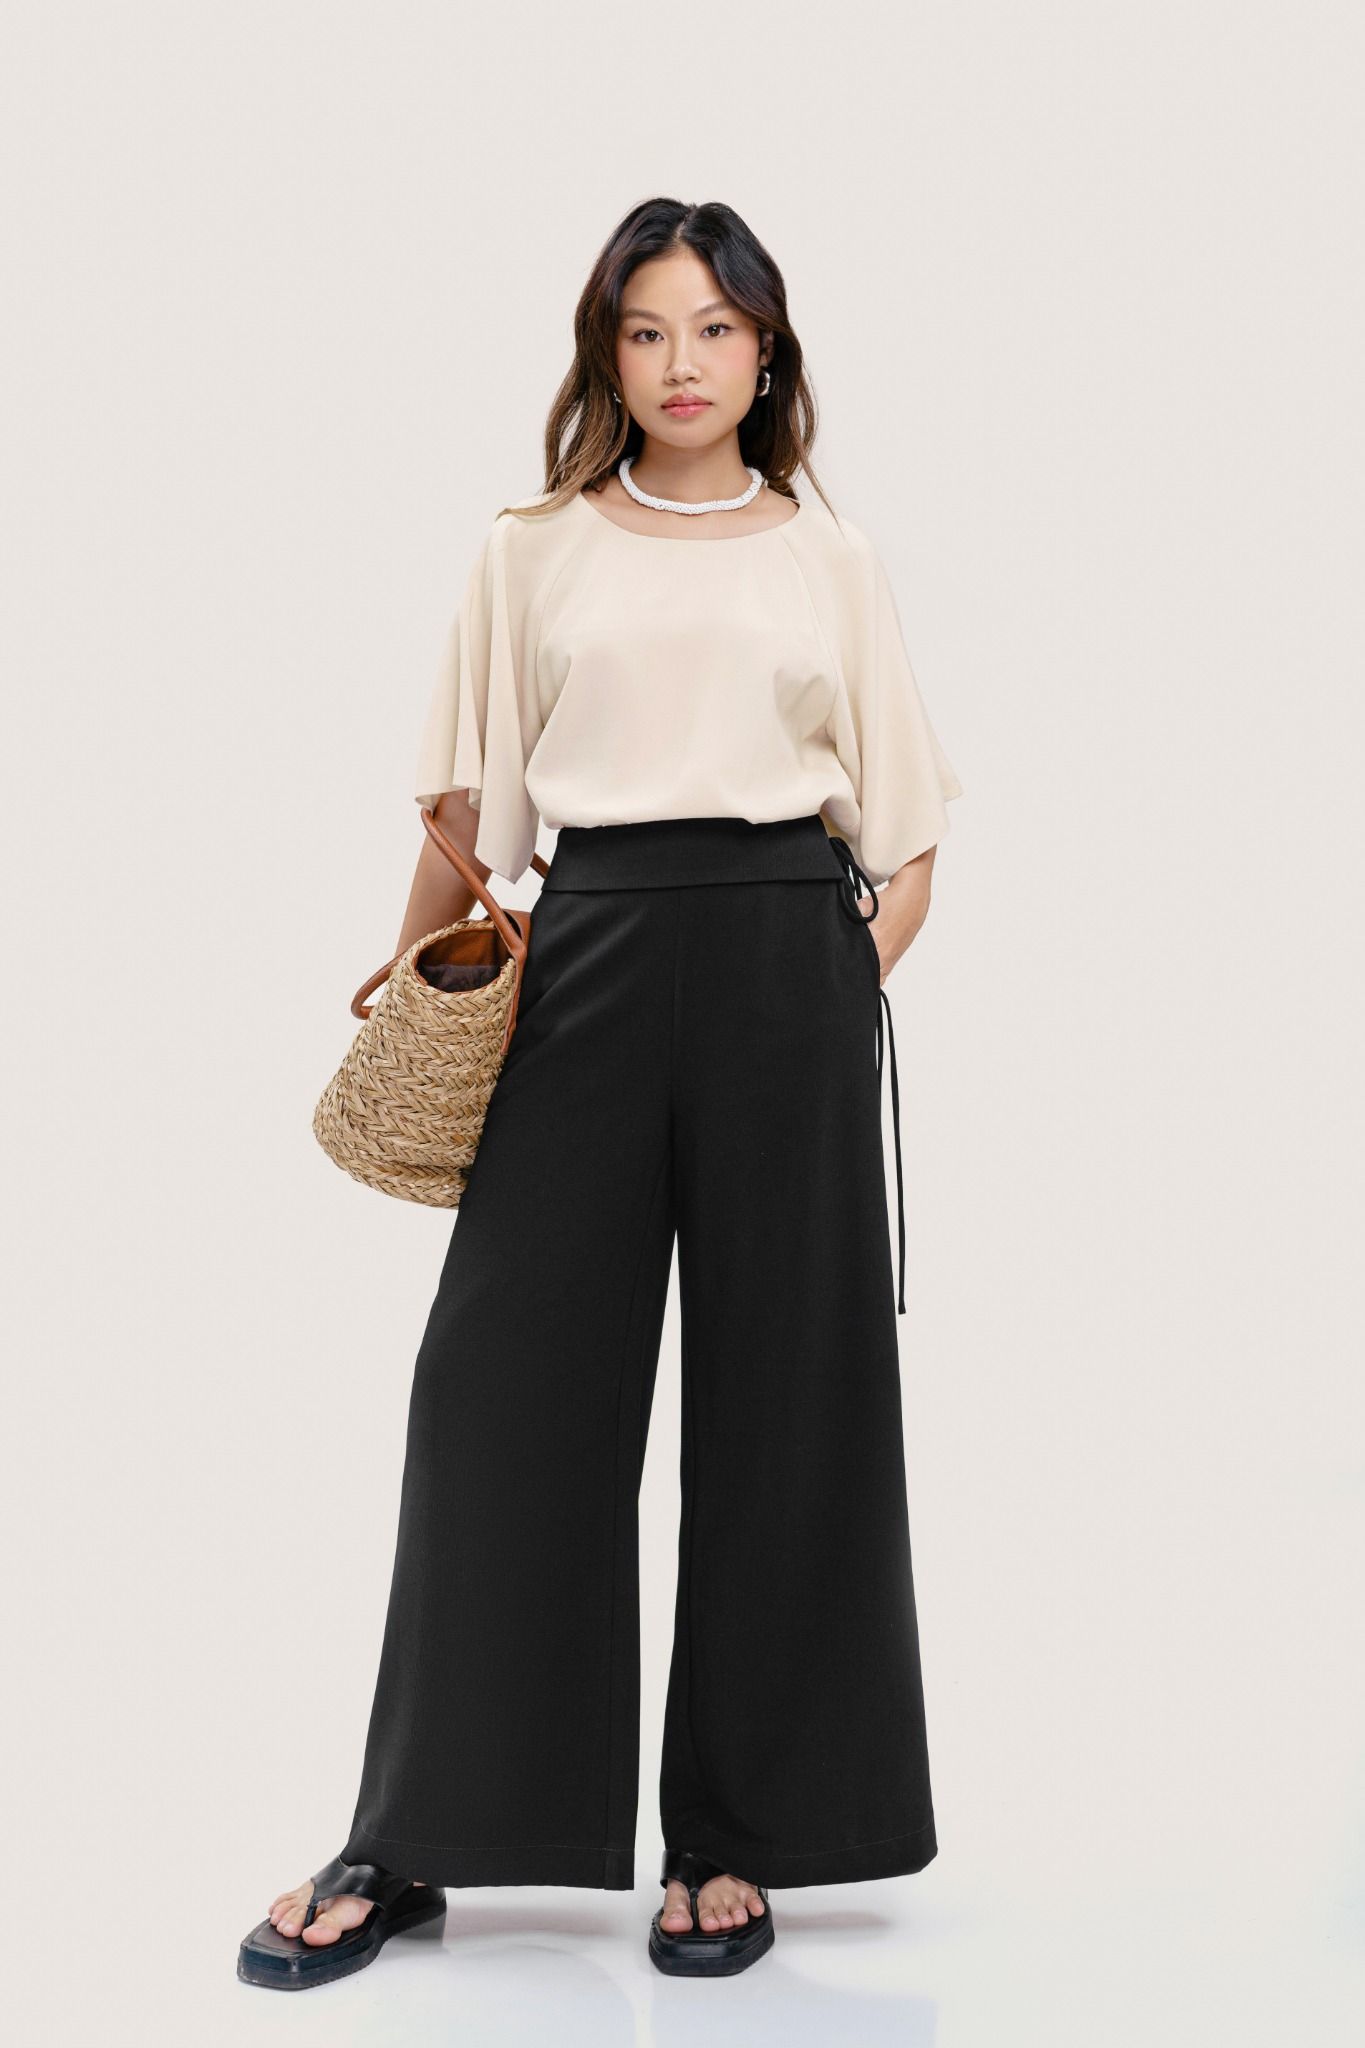  Black High-Waisted Wide Leg Trousers With Side Flat 